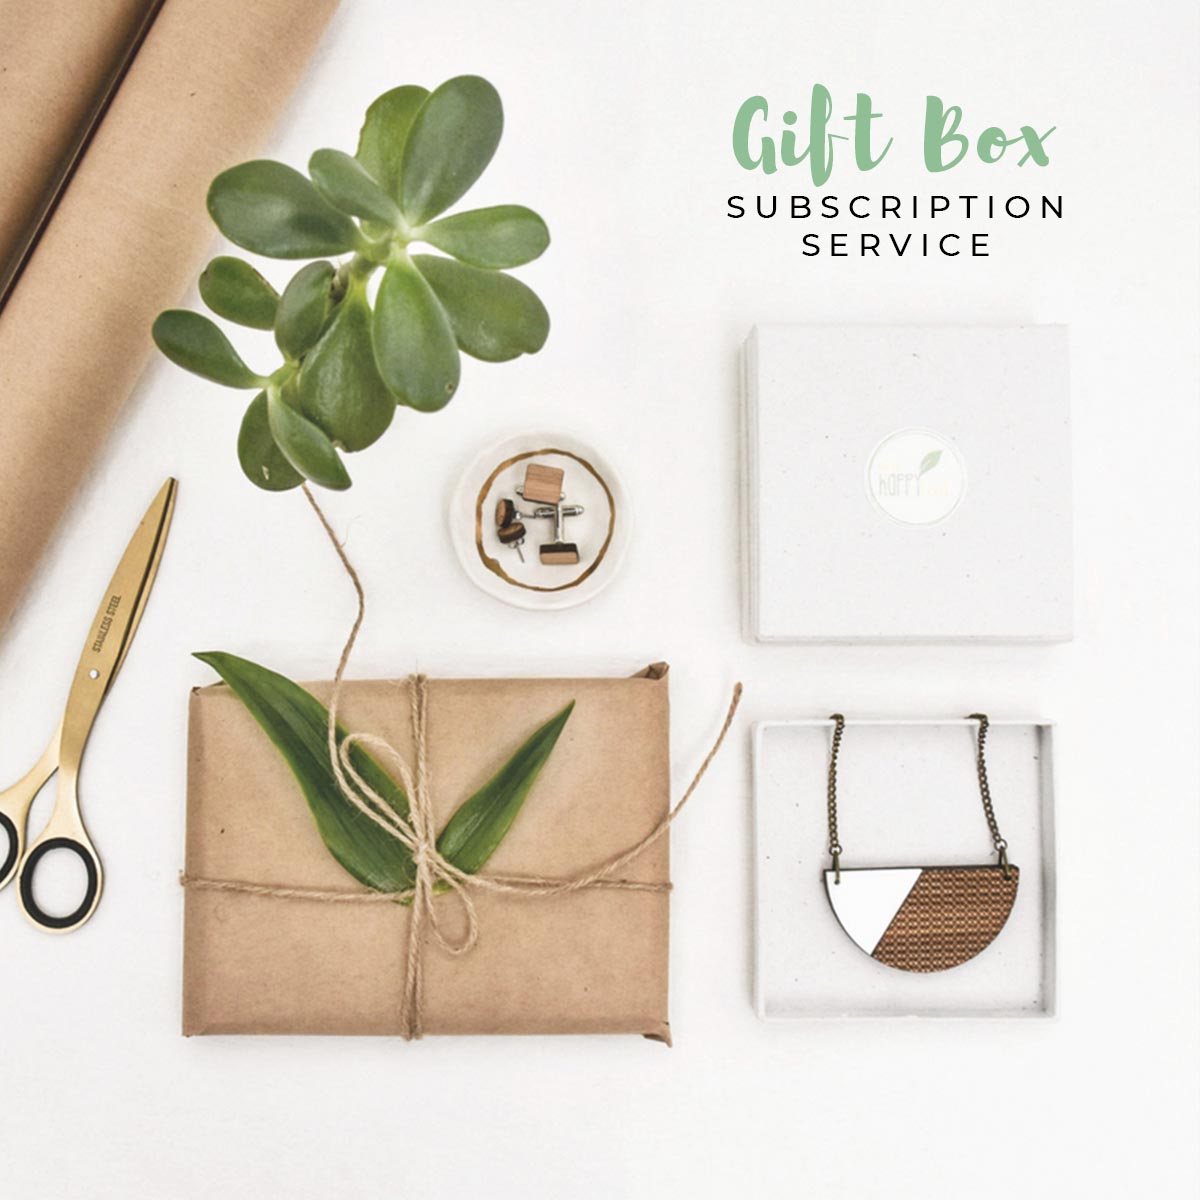 Subscription and gift boxes